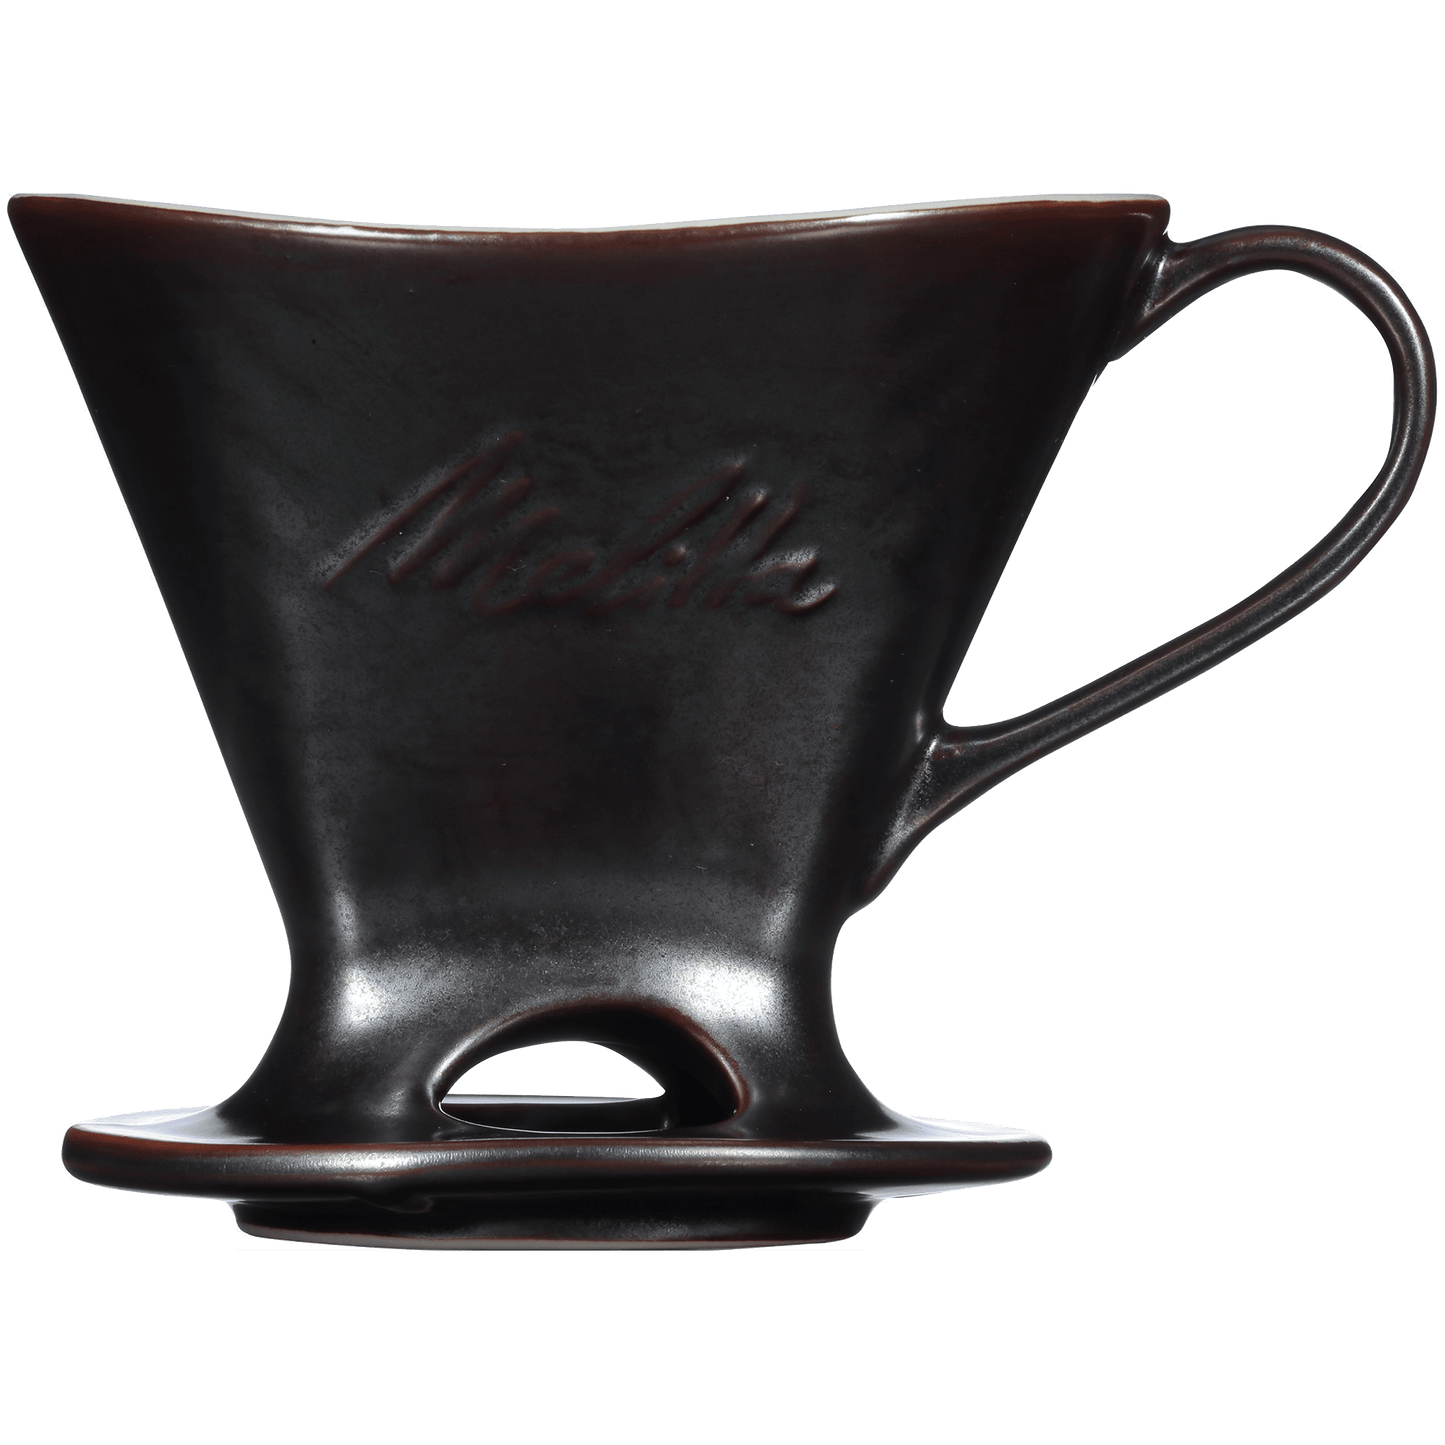 Signature Series 1-Cup Pour-Over Coffeemaker - Porcelain With Metallic Finish, Gunmetal